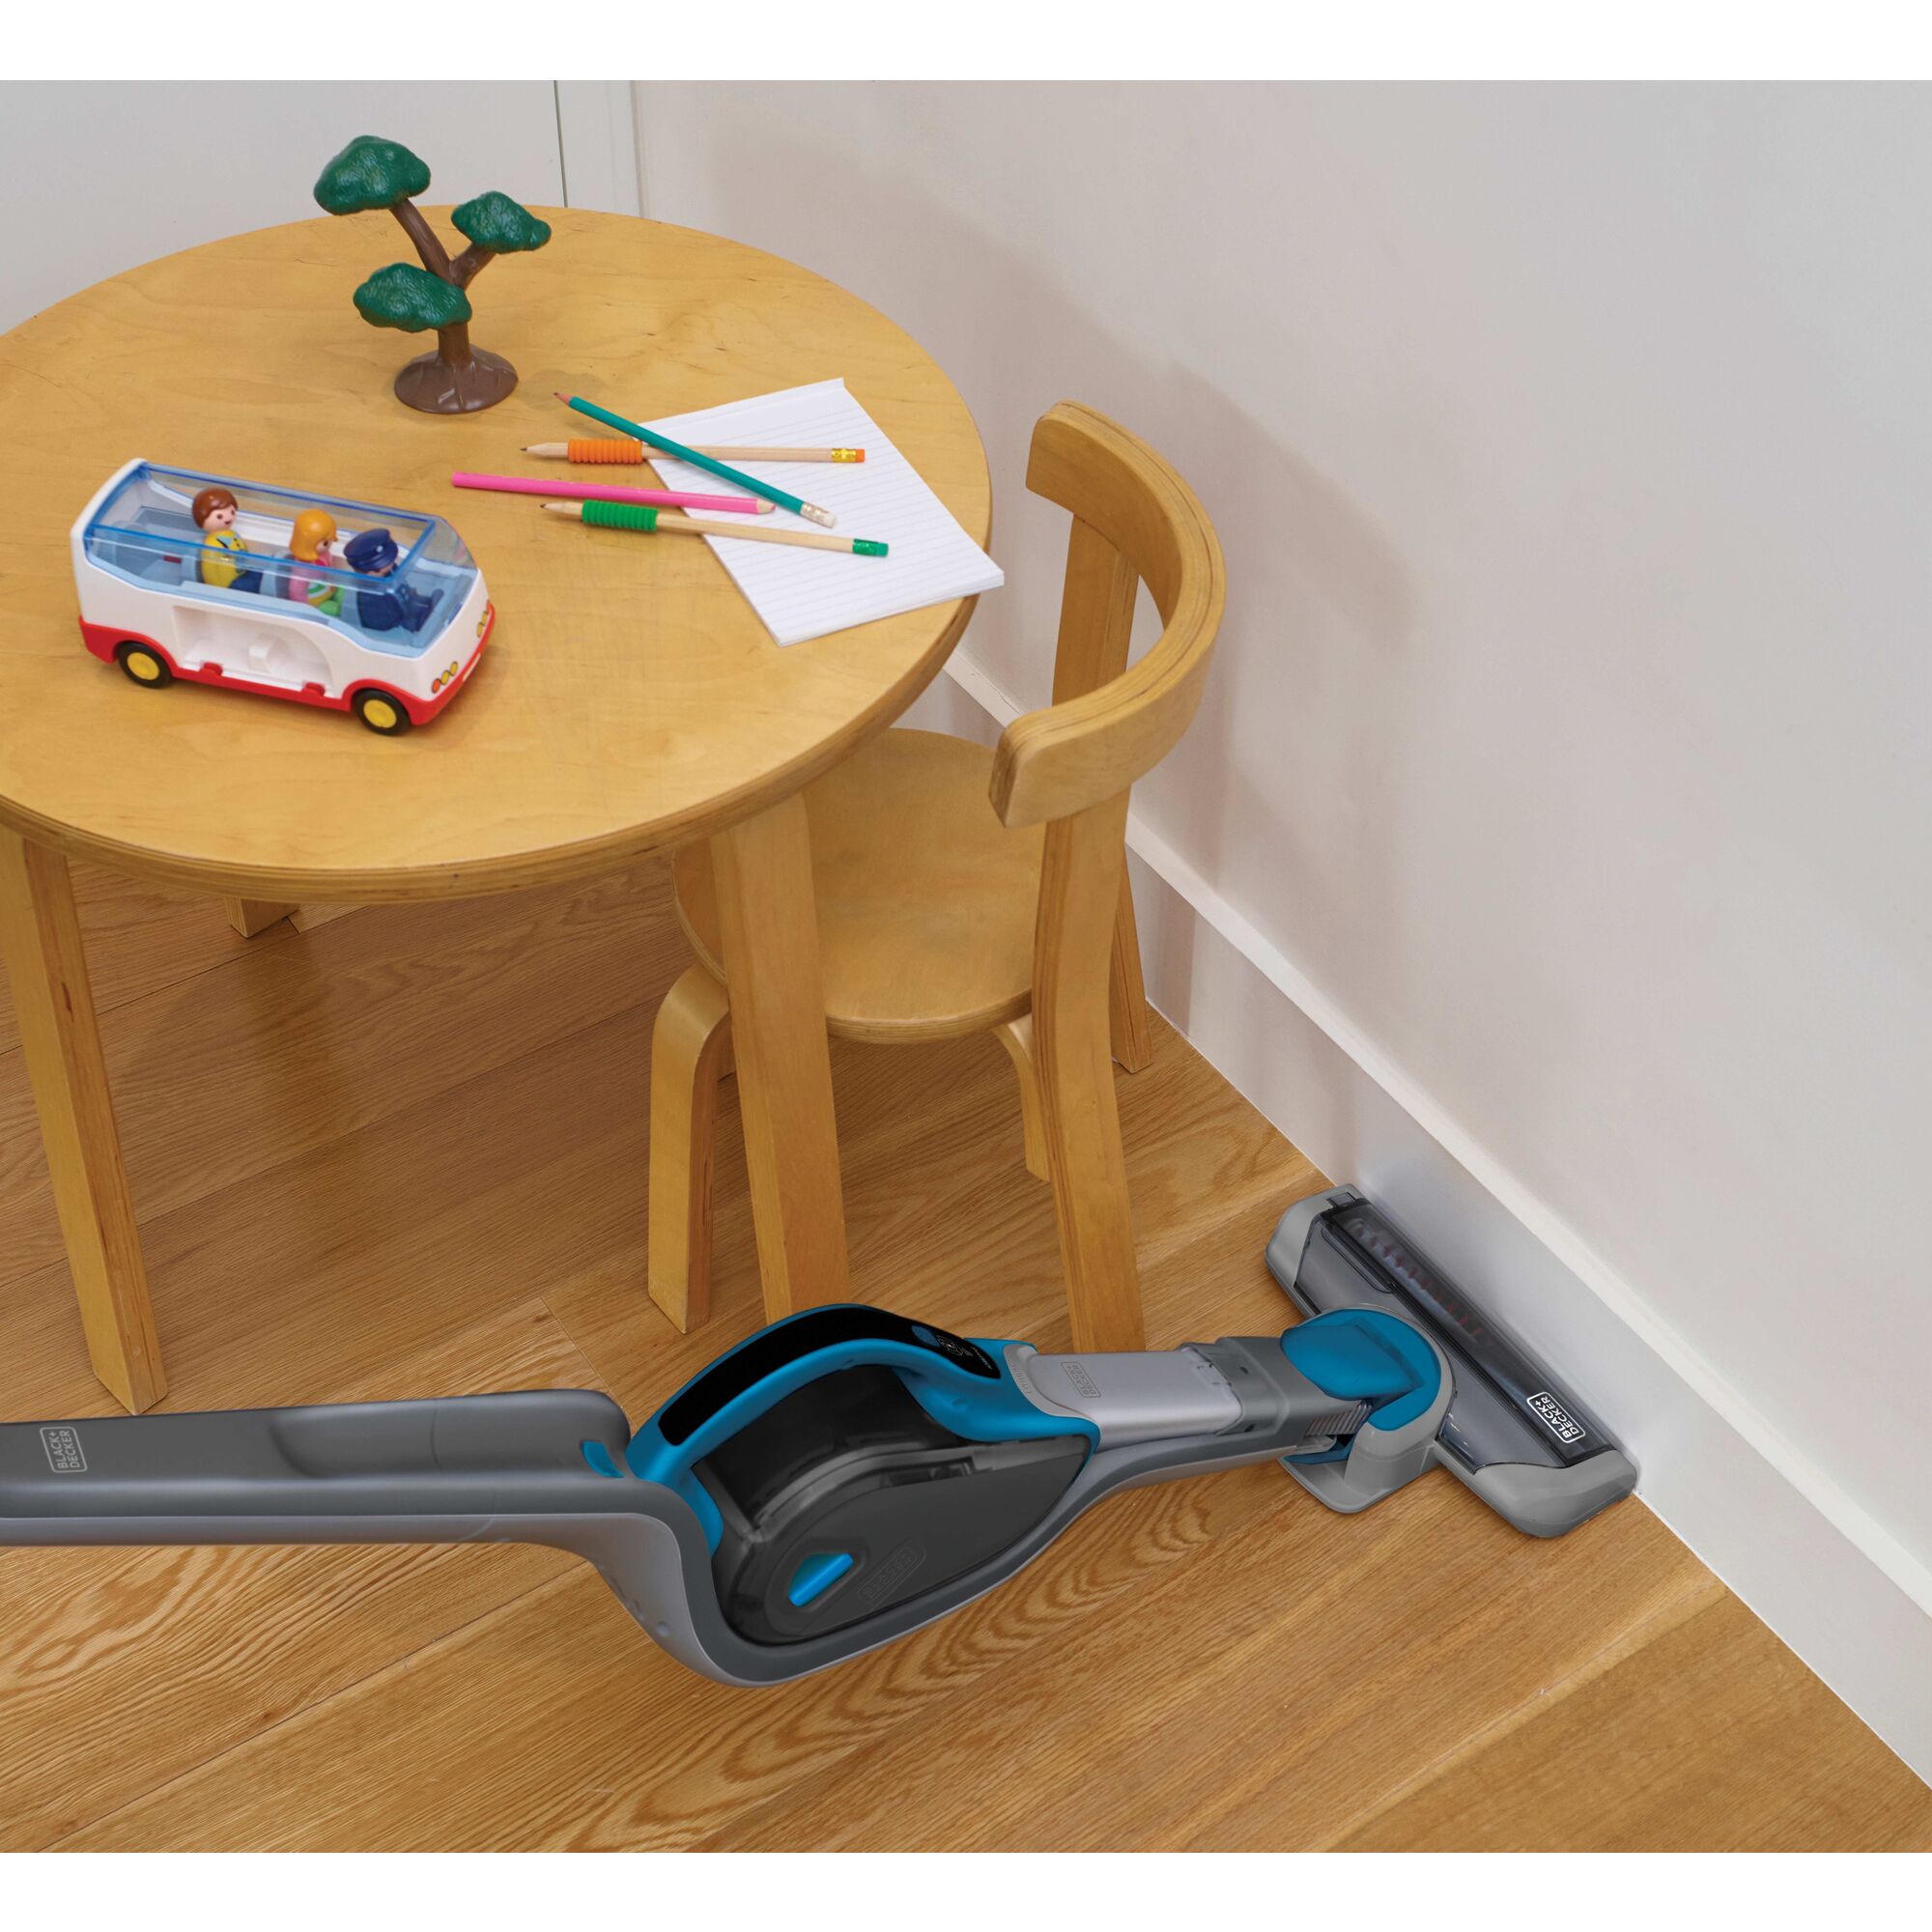 Cordless Lithium 2 in 1 Stick Vacuum being used to clean room corners.